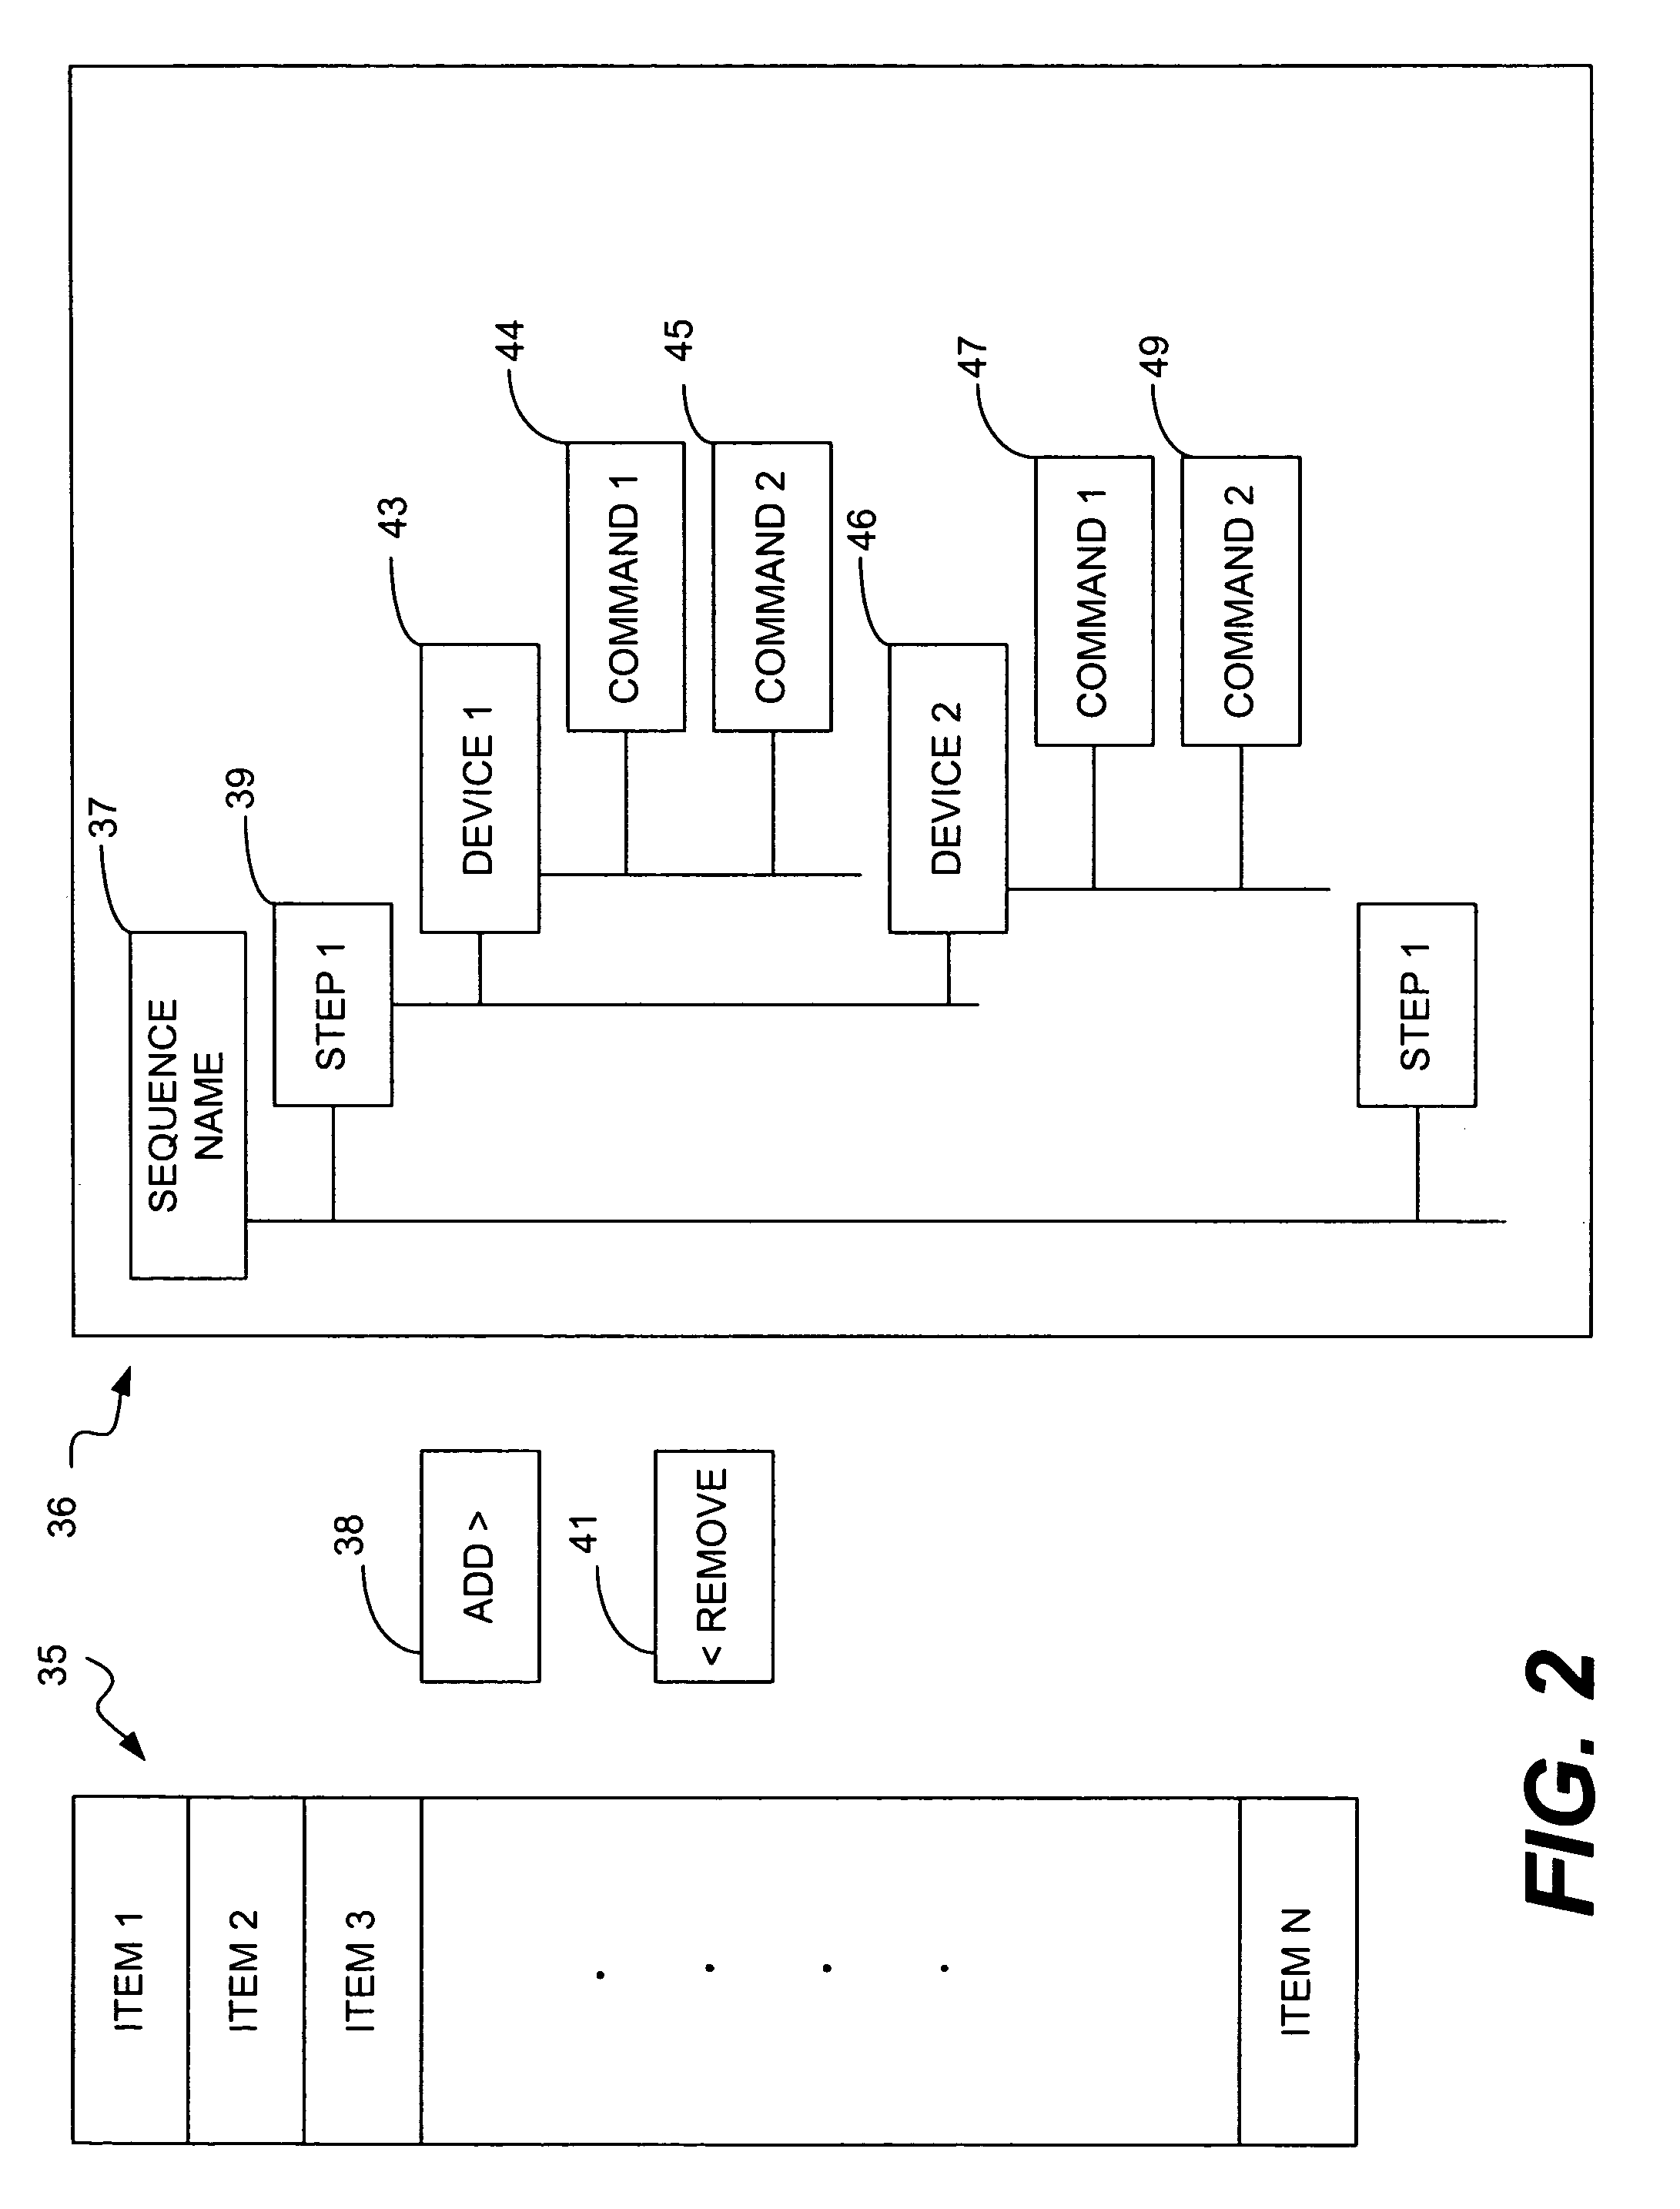 Method and apparatus for analyzing machine control sequences